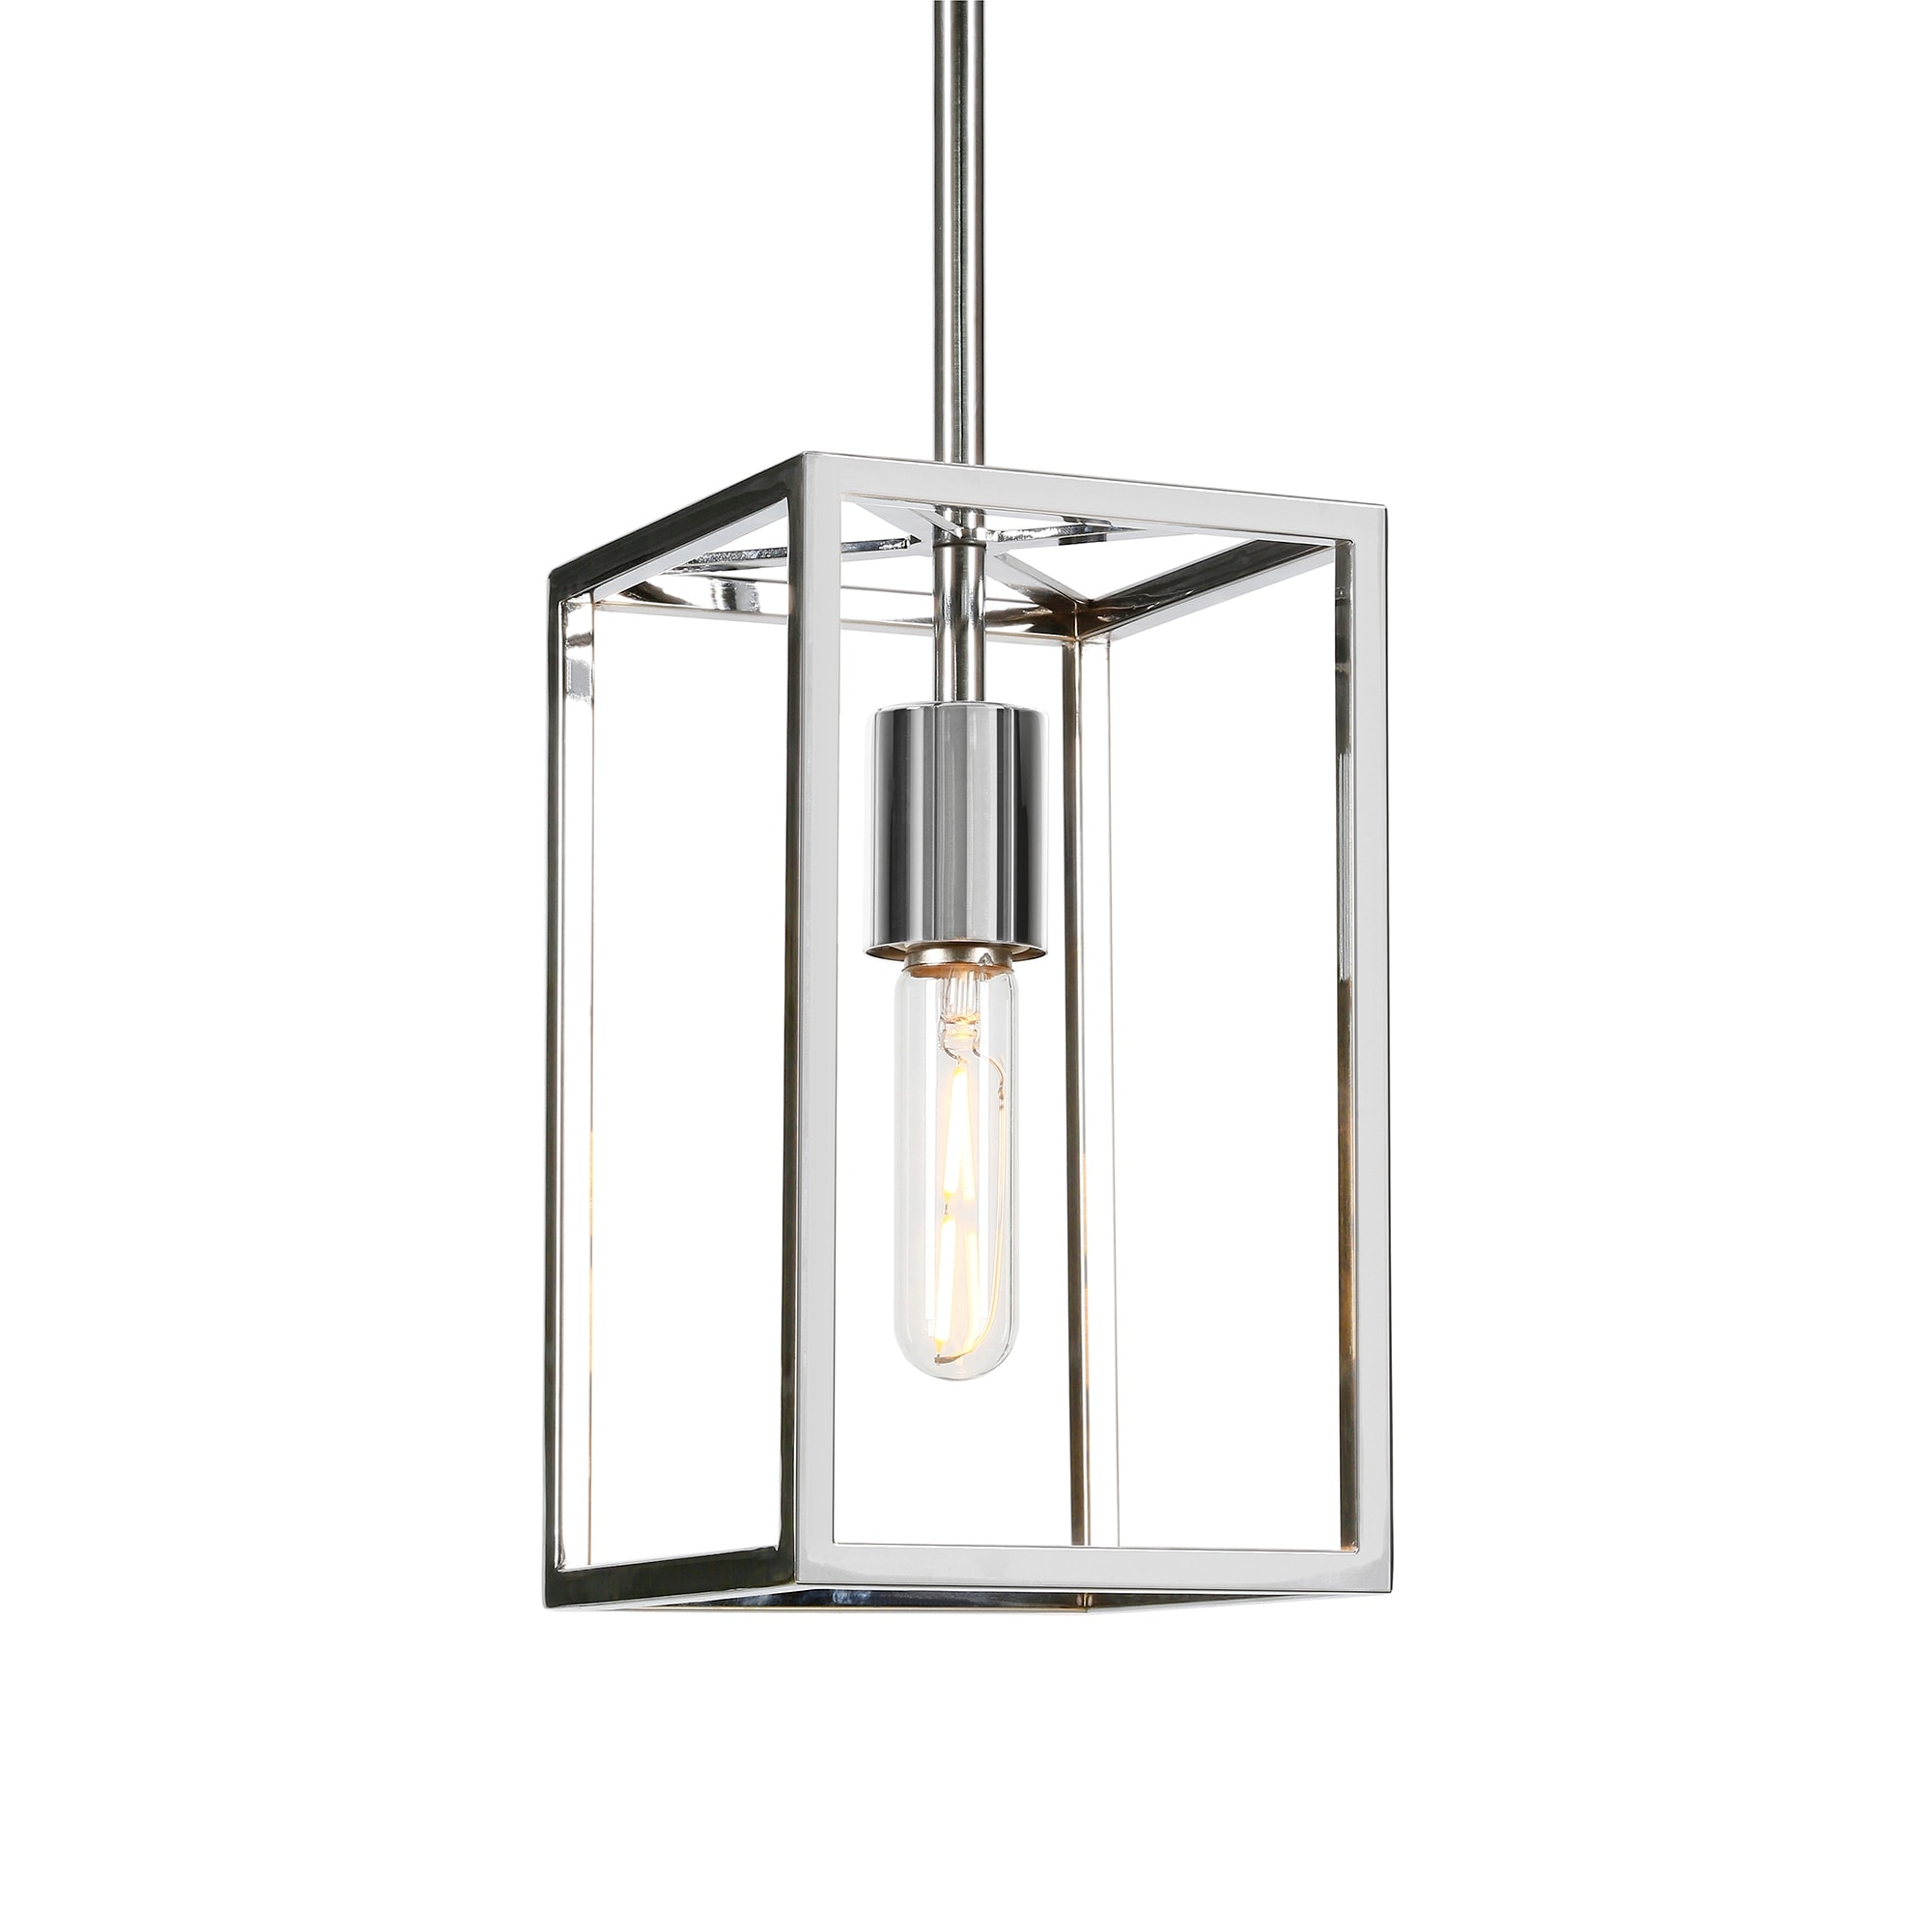 Details about   ITC 3455D-UB54D106-DB 15.3" Square Pendant Light with Glass 